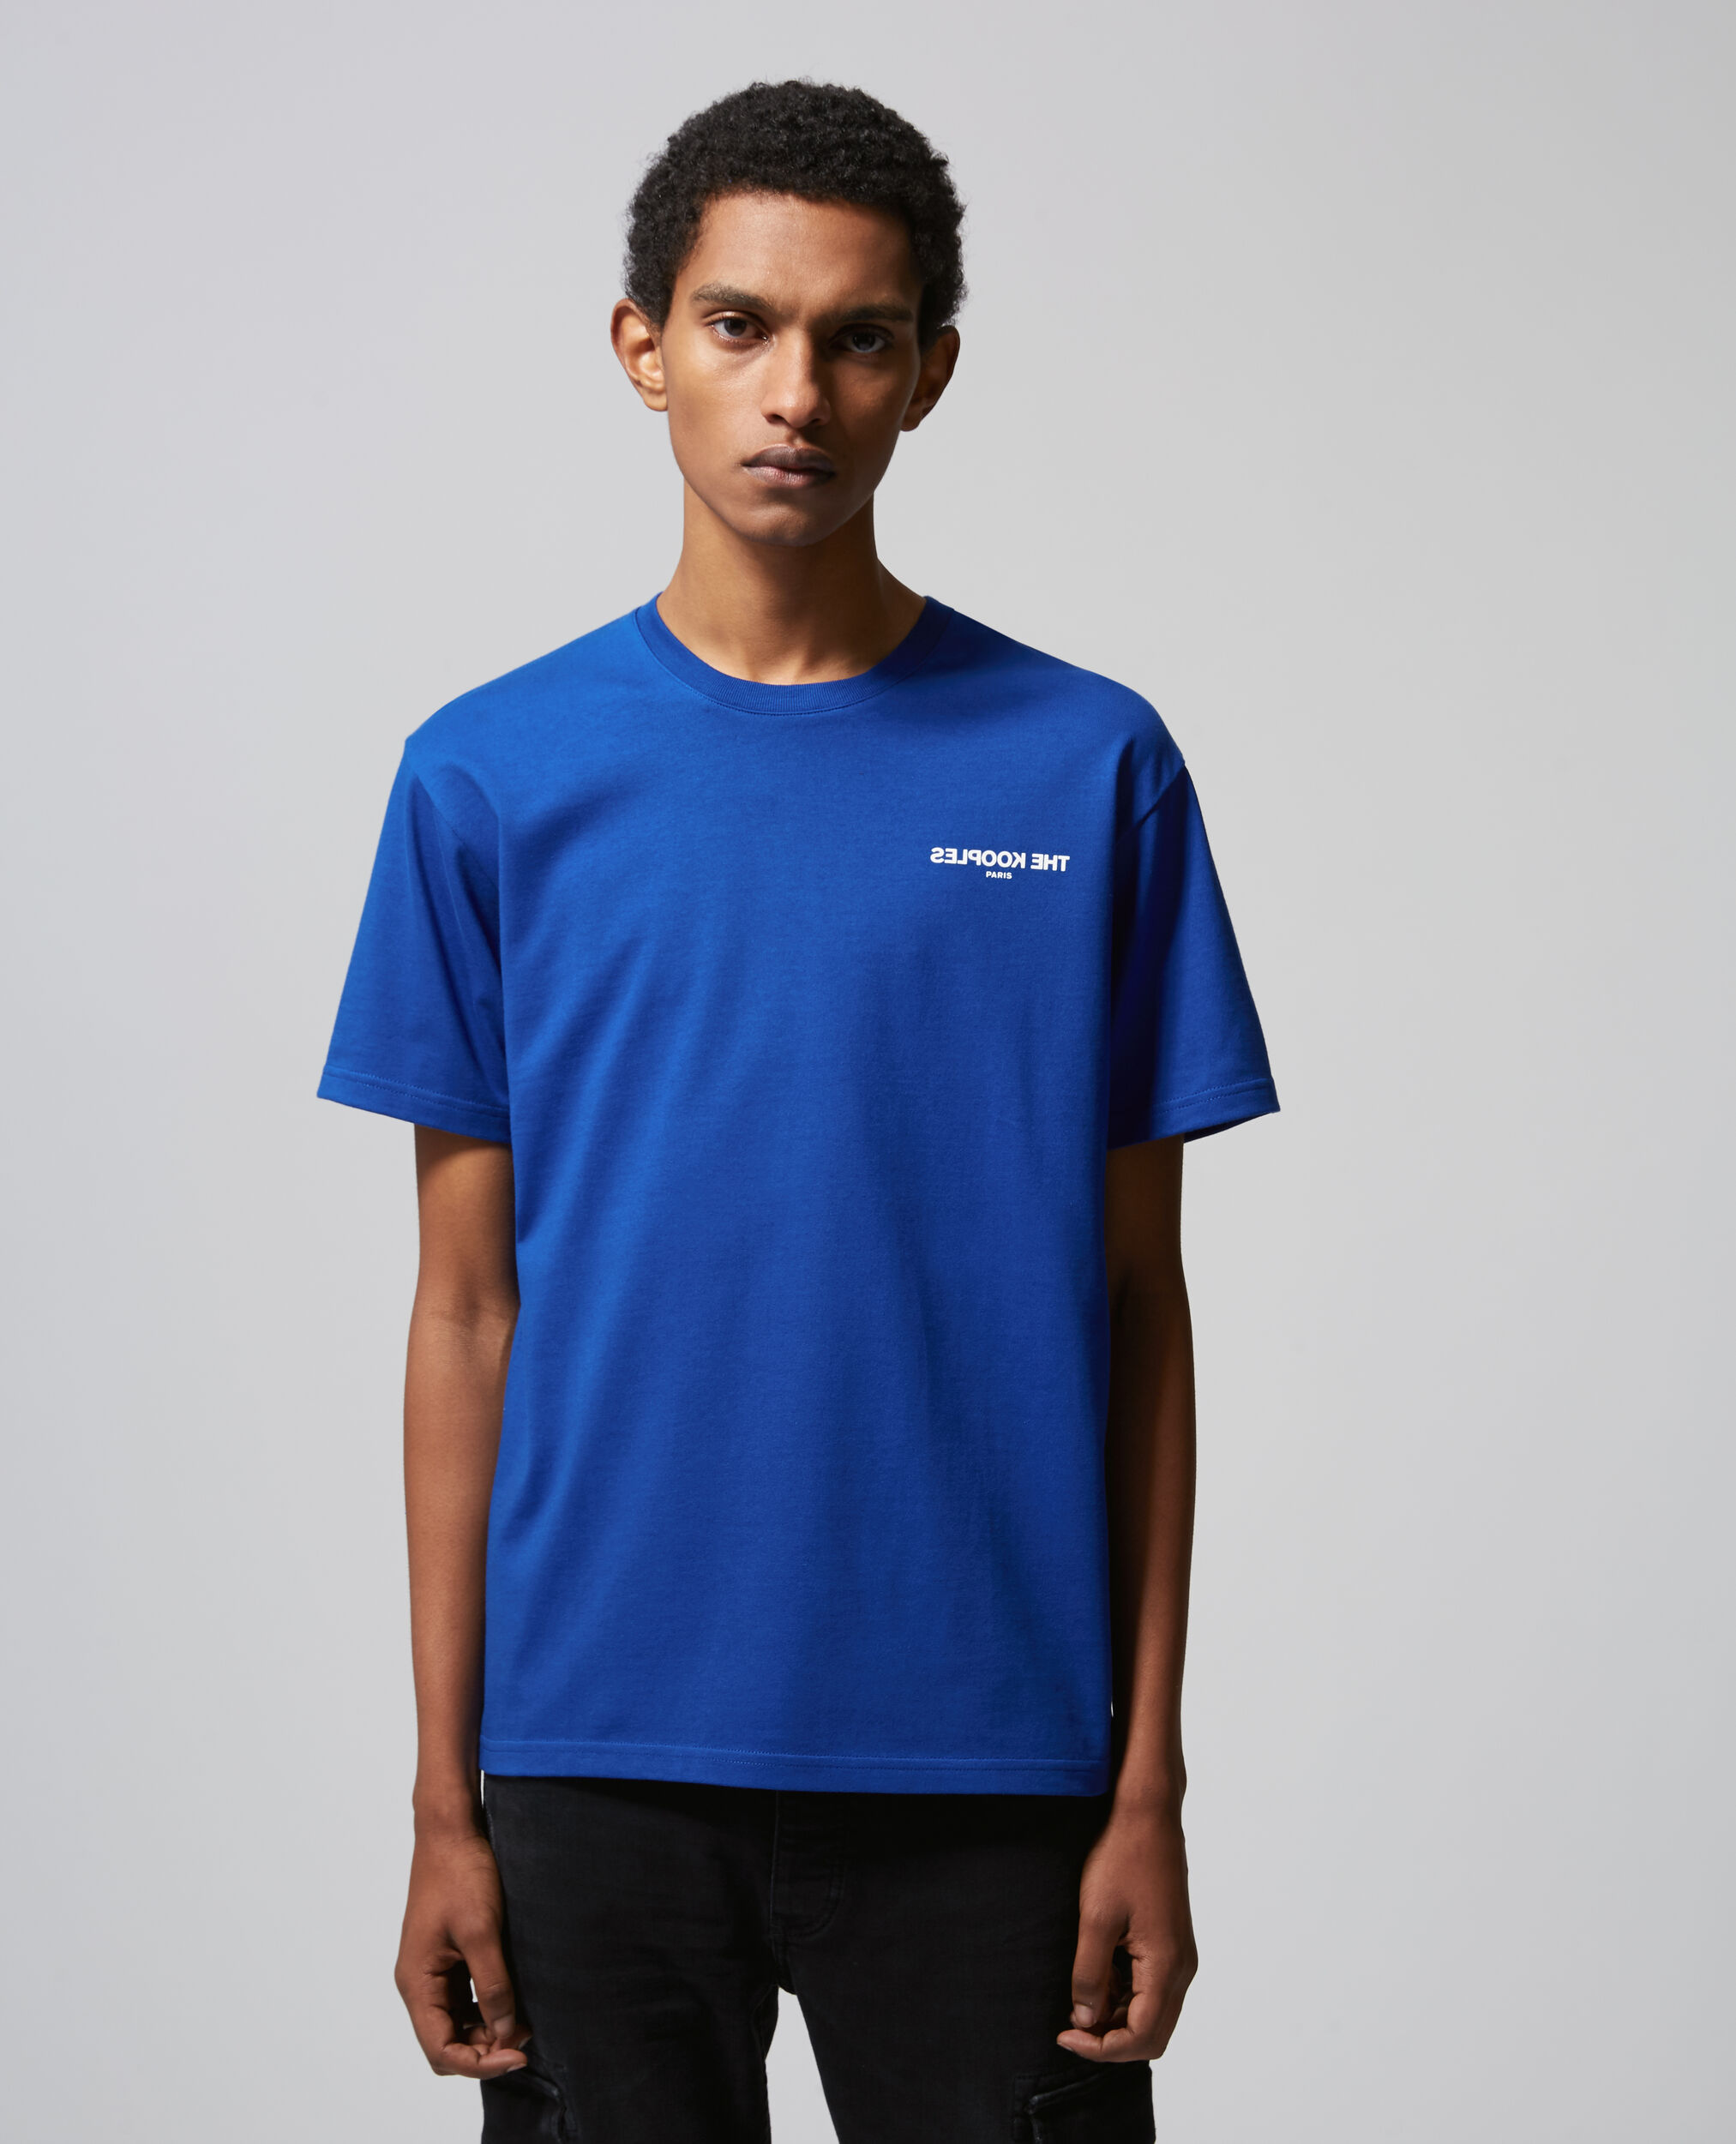 Blue cotton T-shirt with The Kooples logo, ELECTRIC BLUE, hi-res image number null